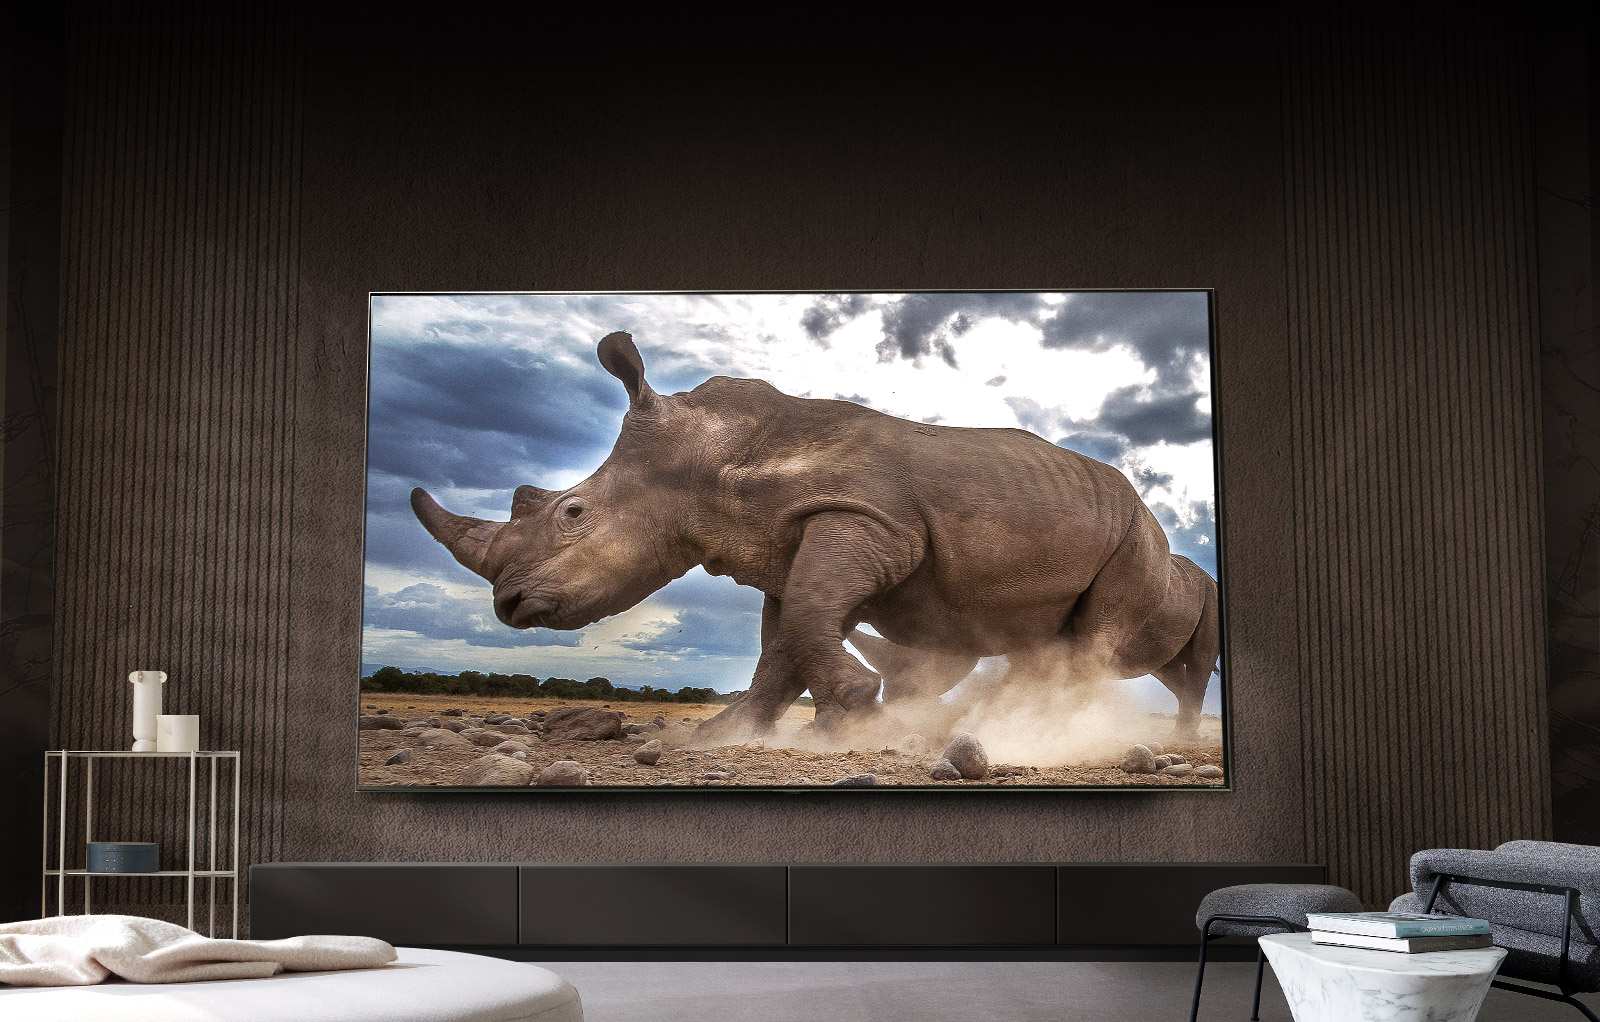 QNED's ultra-big screen is magnificently displayed at low angles.